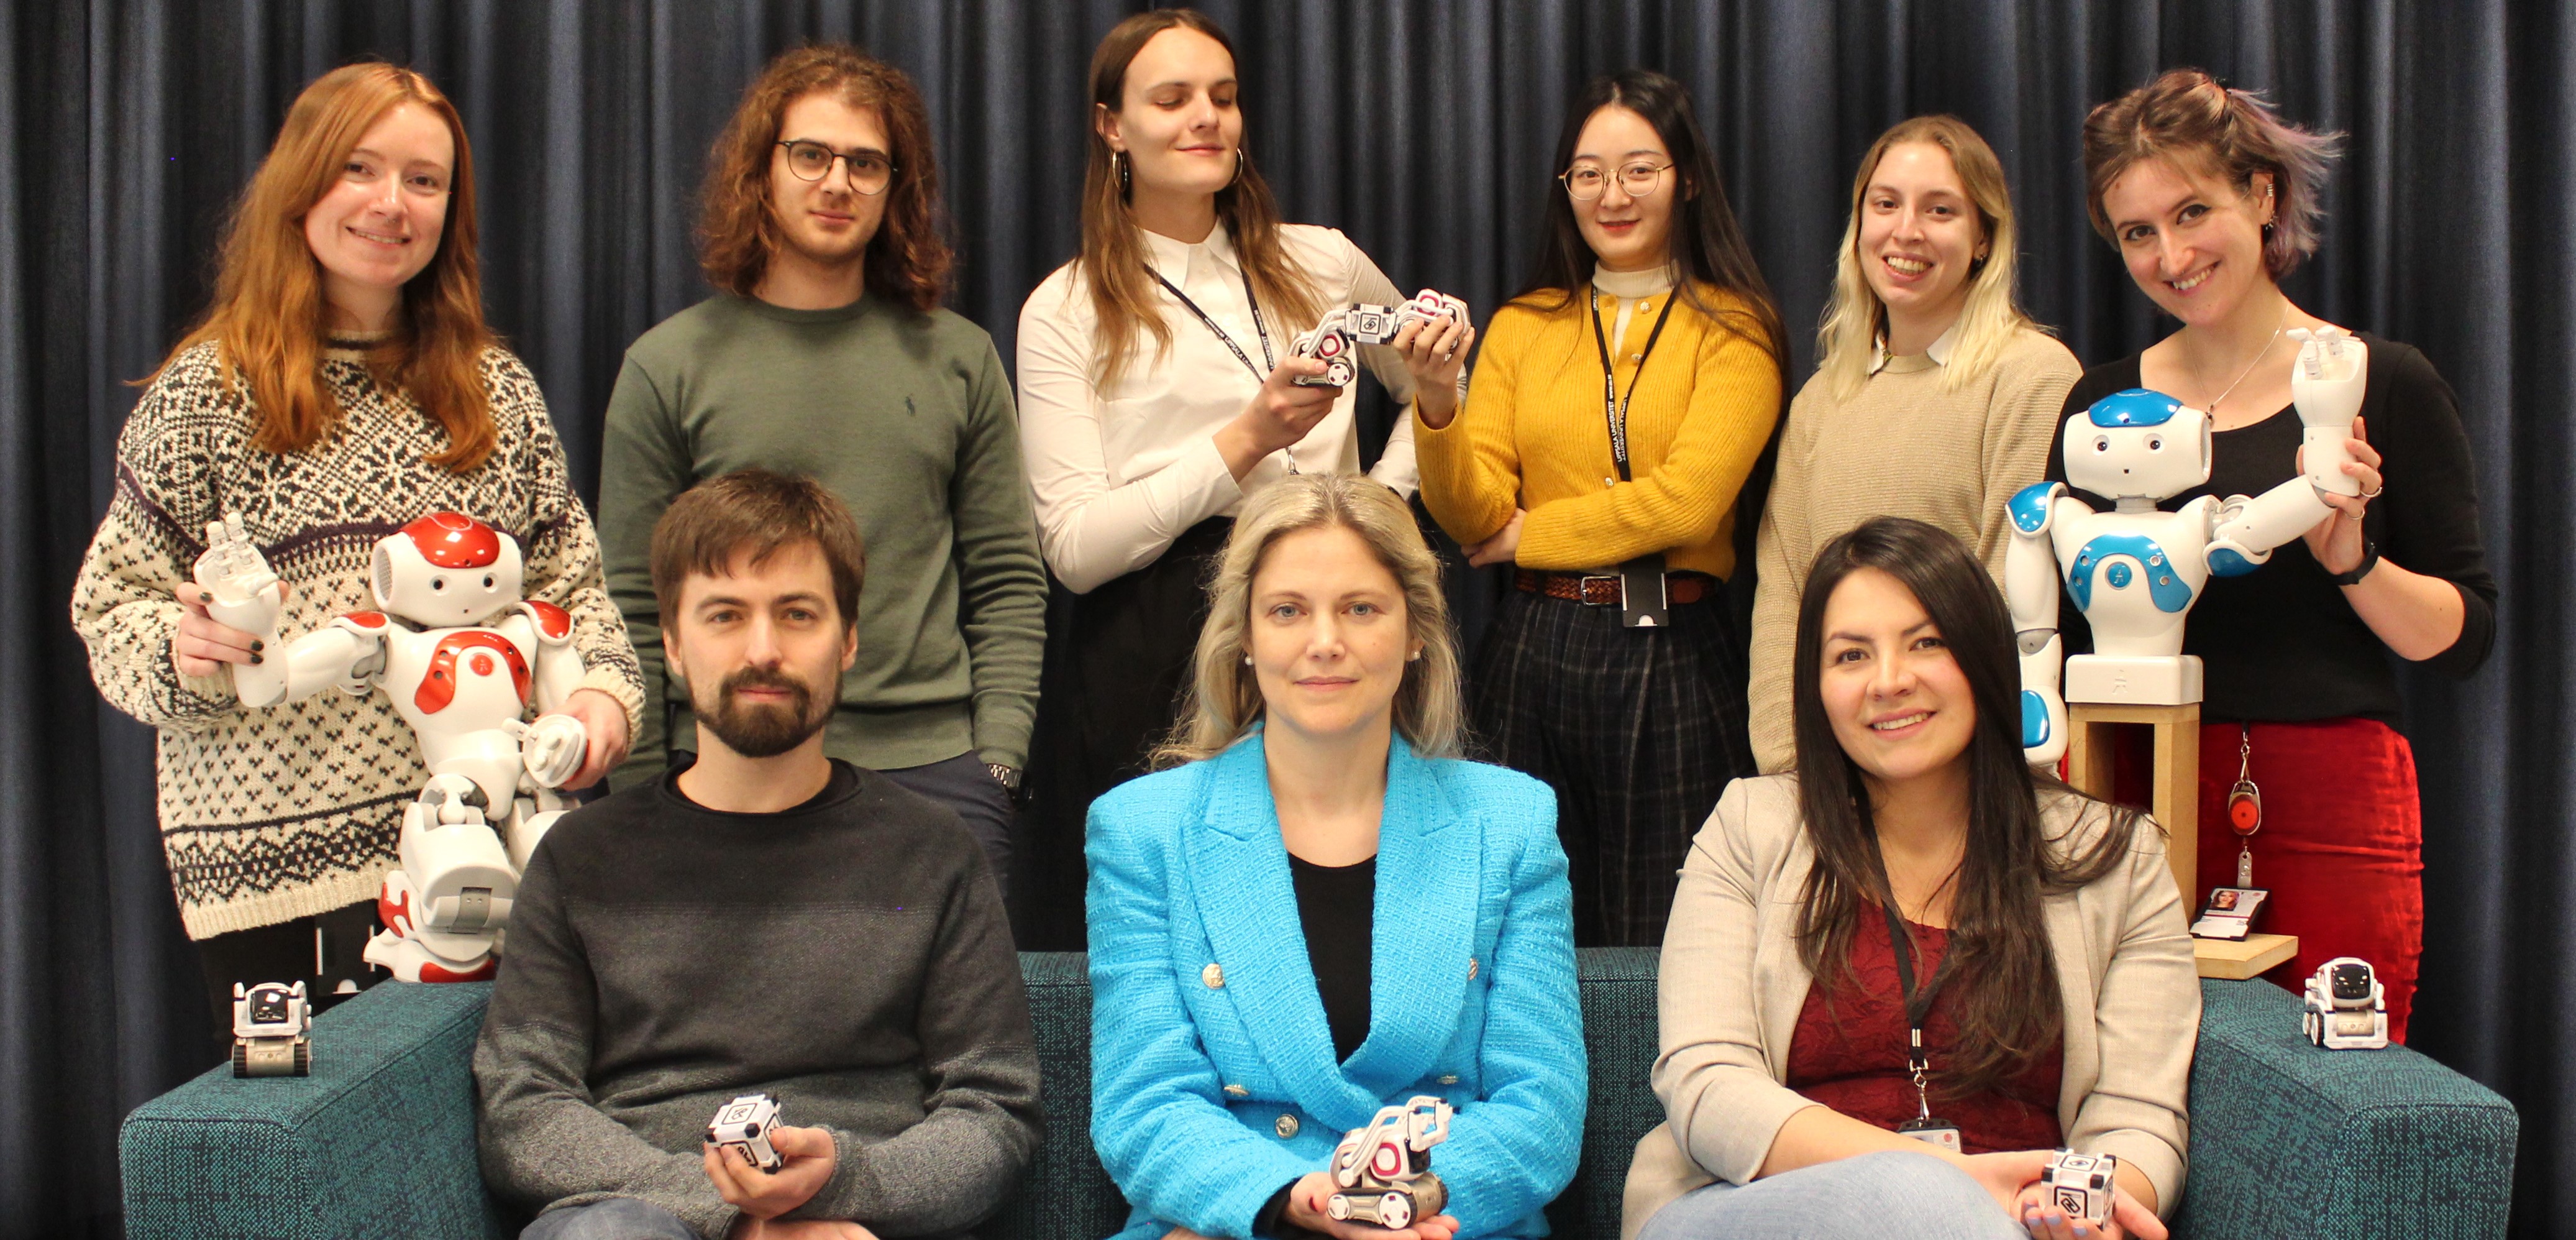 Group photo of the lab’s members